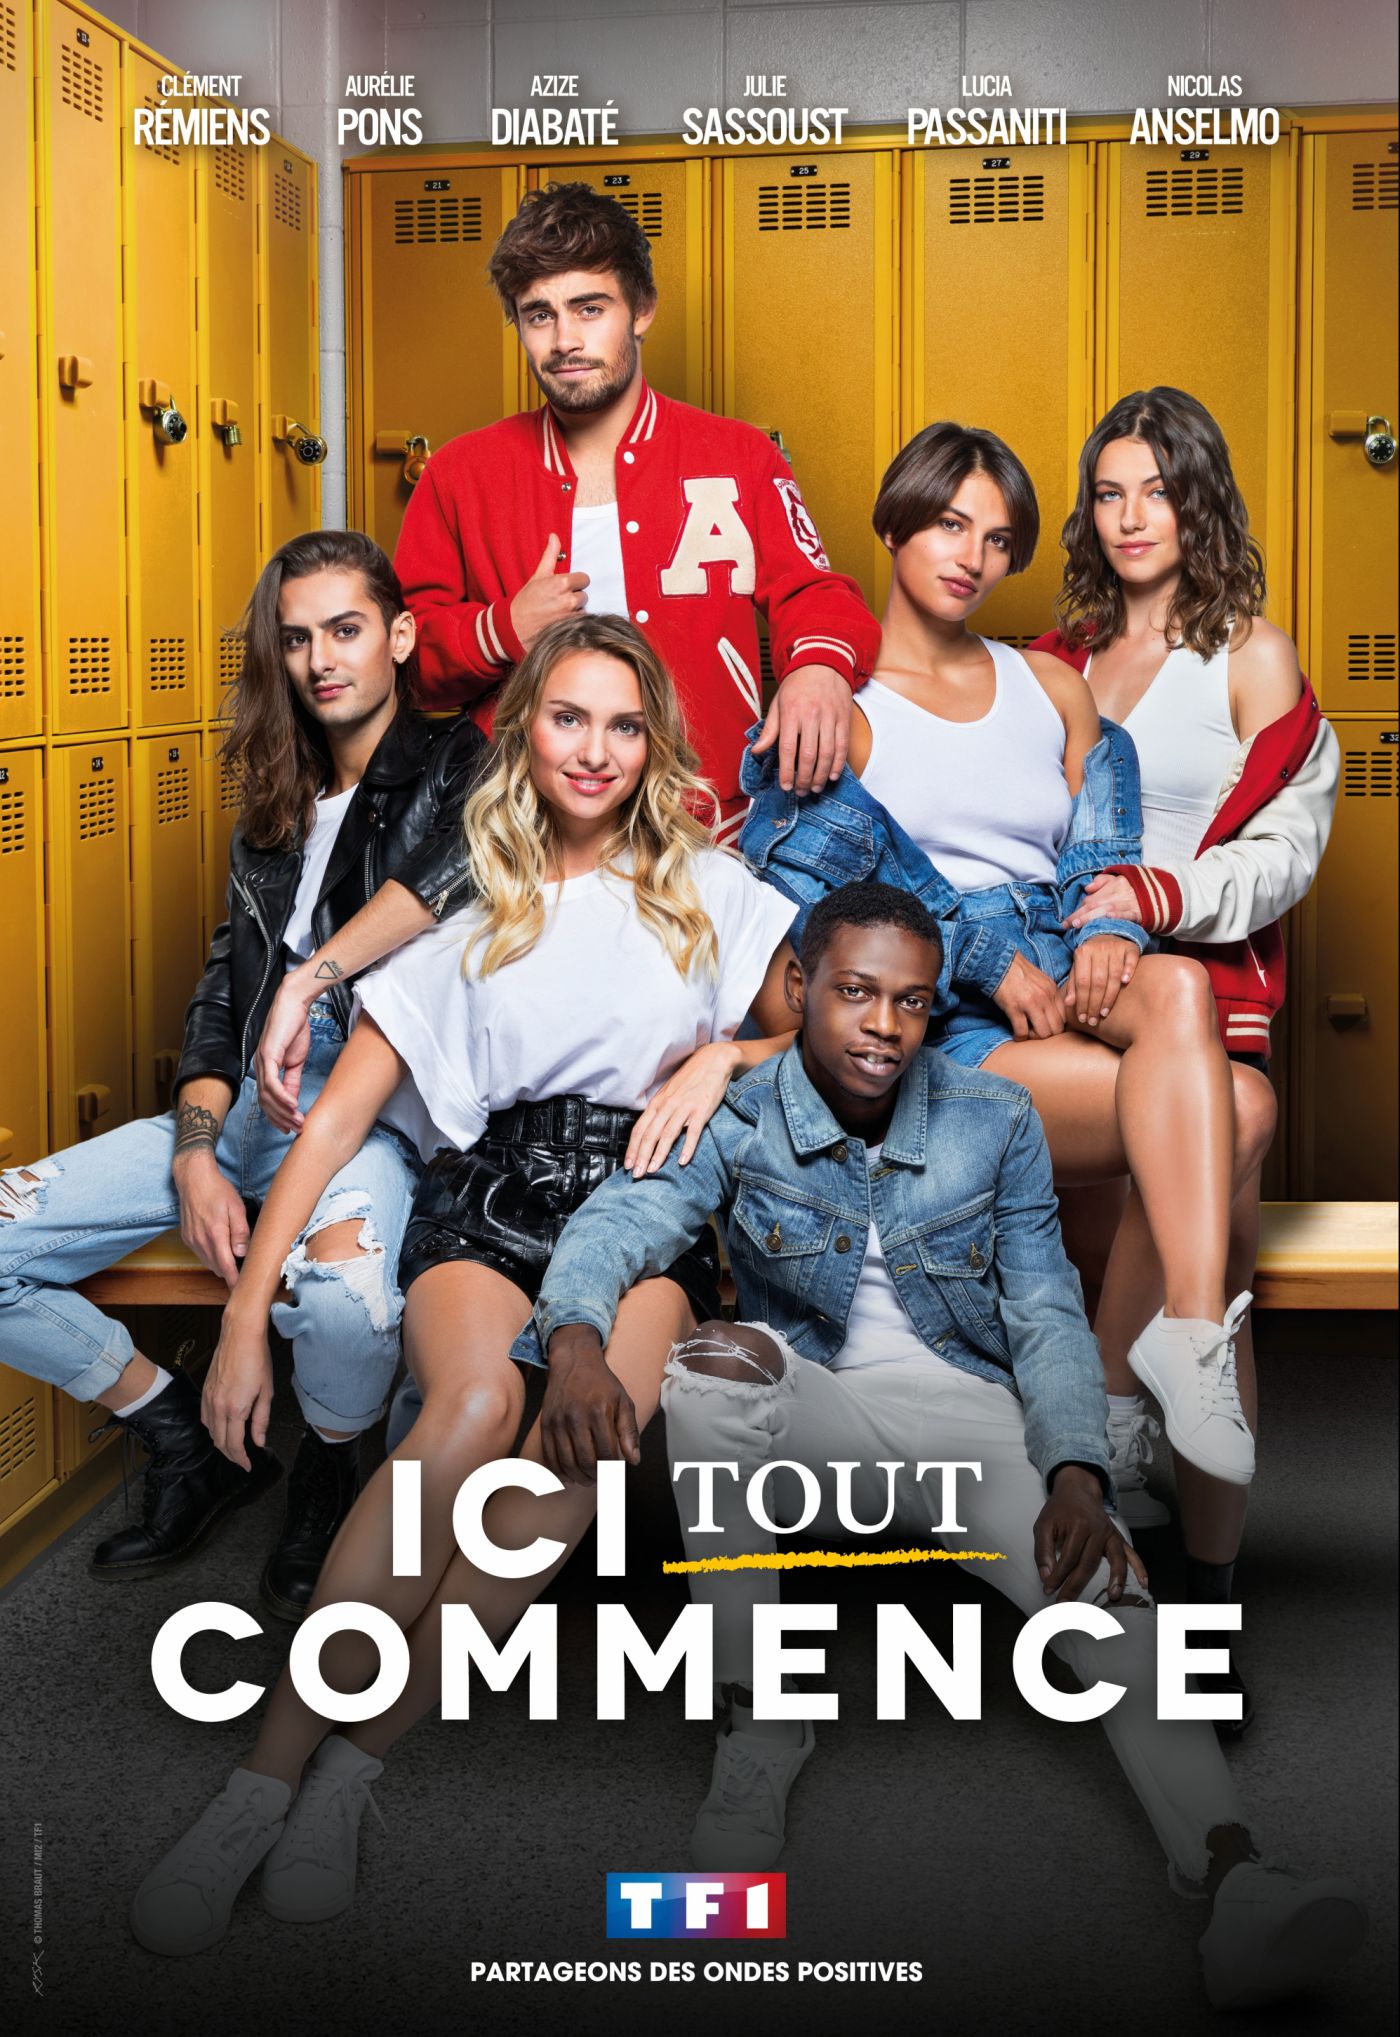 TV ratings for Ici Tout Commence in Suecia. TF1 TV series